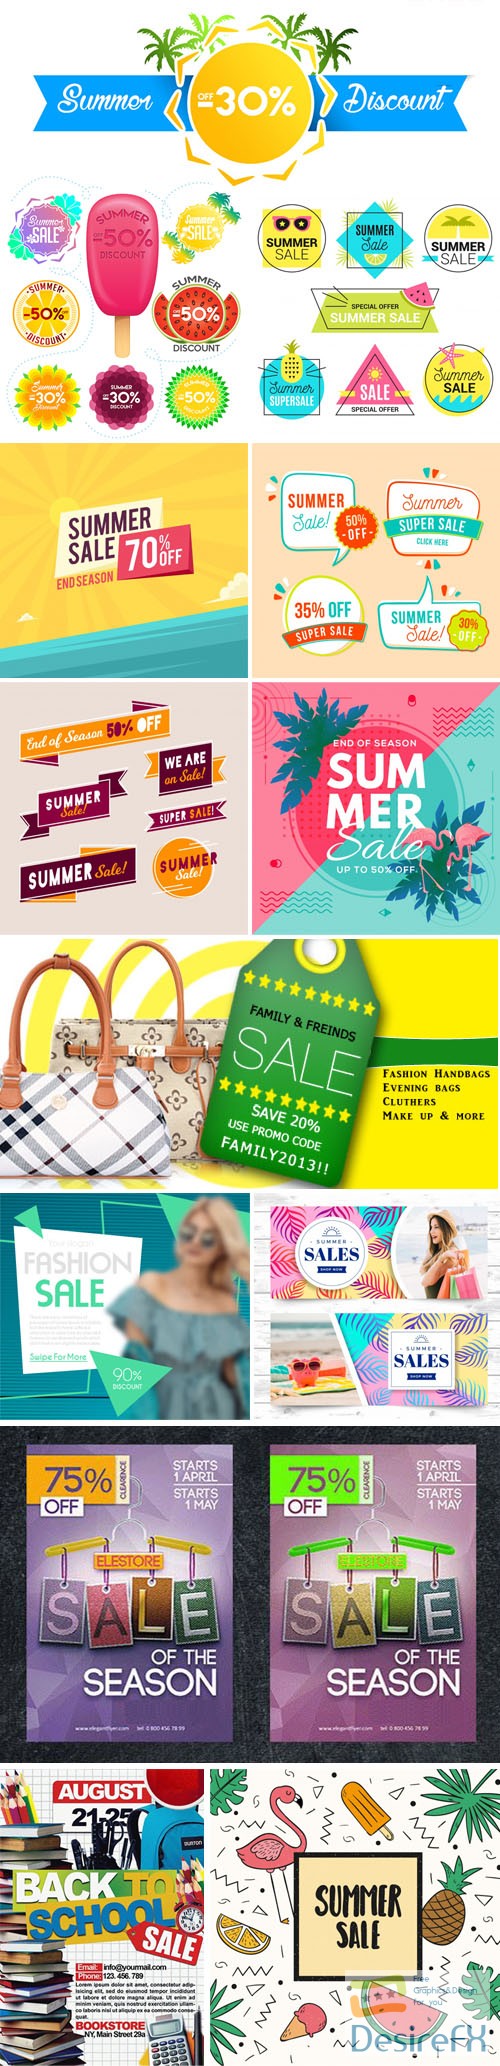 12 Hot Summer Sale/Discount Advertising [Ai/EPS/PSD]